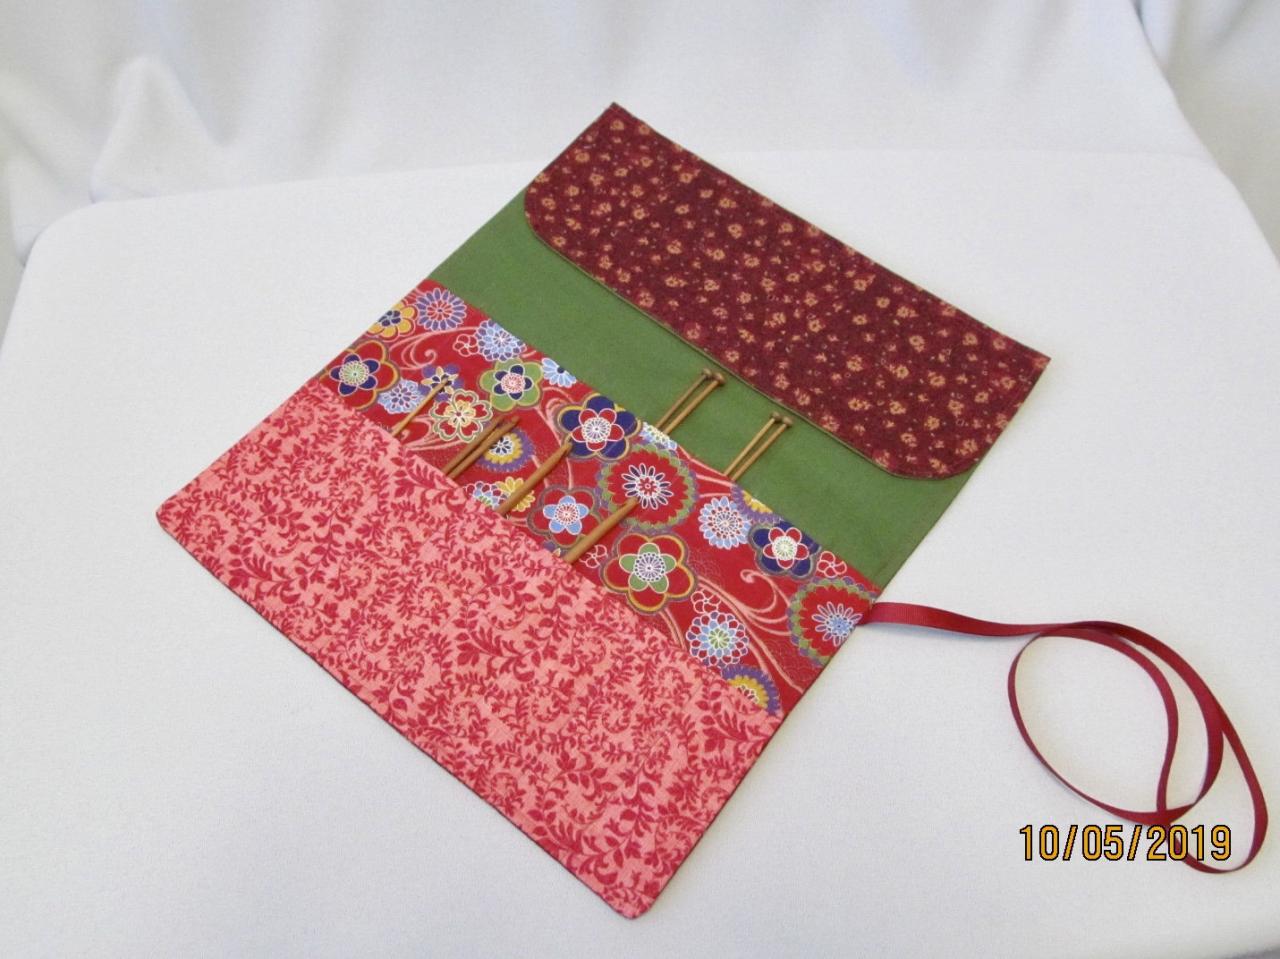 Cotton Fabric Knit/crochet Needle Holder In Reds And Green